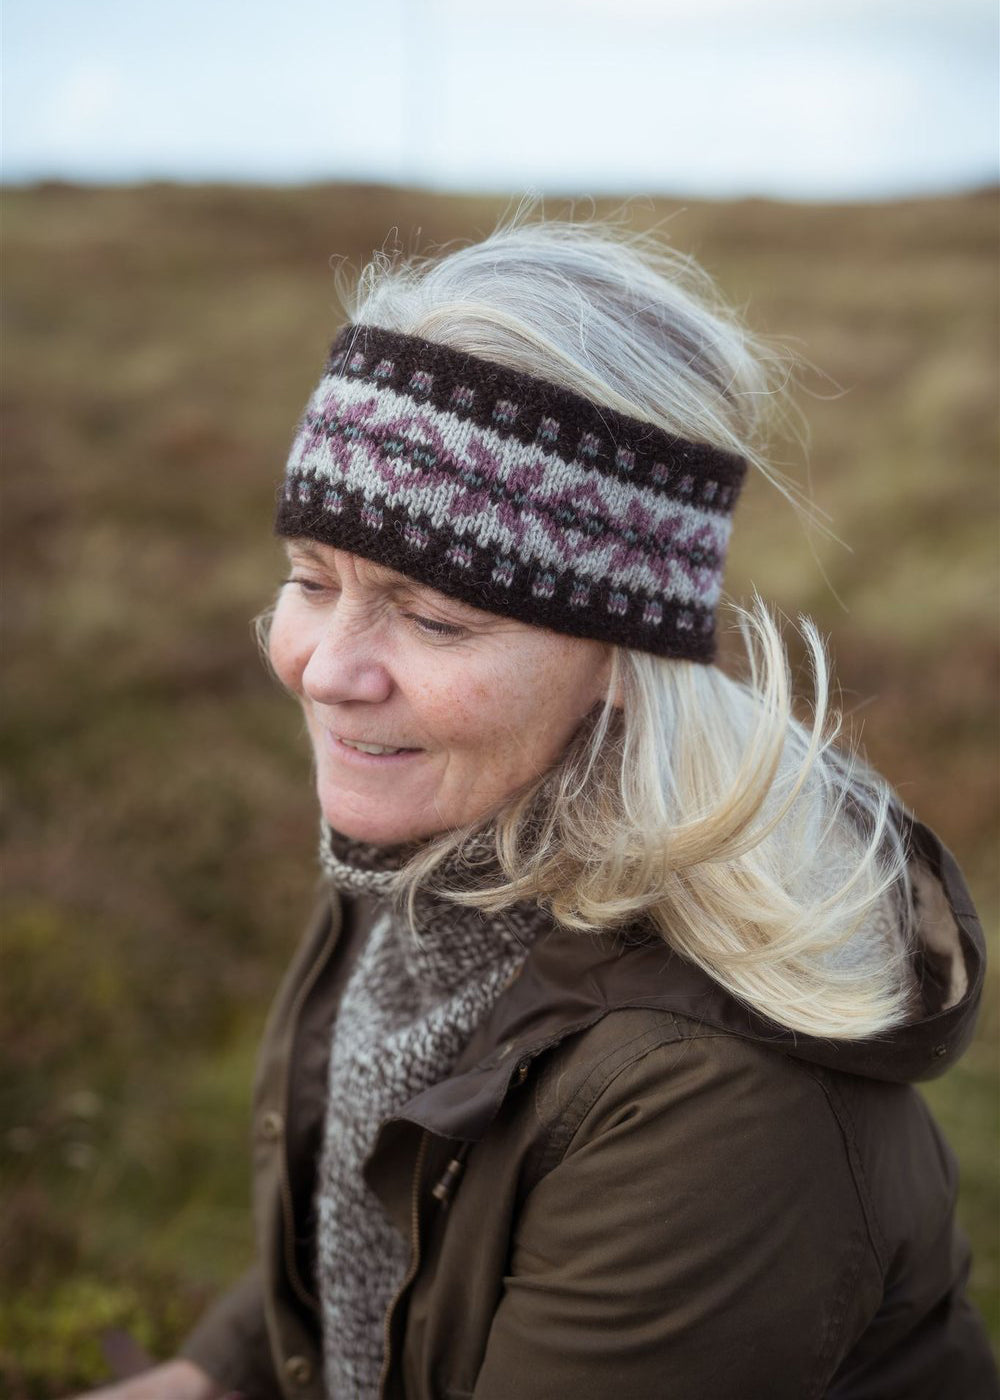 Myrtle knitted headband shown worn by Meg, the designer of the knitting pattern.